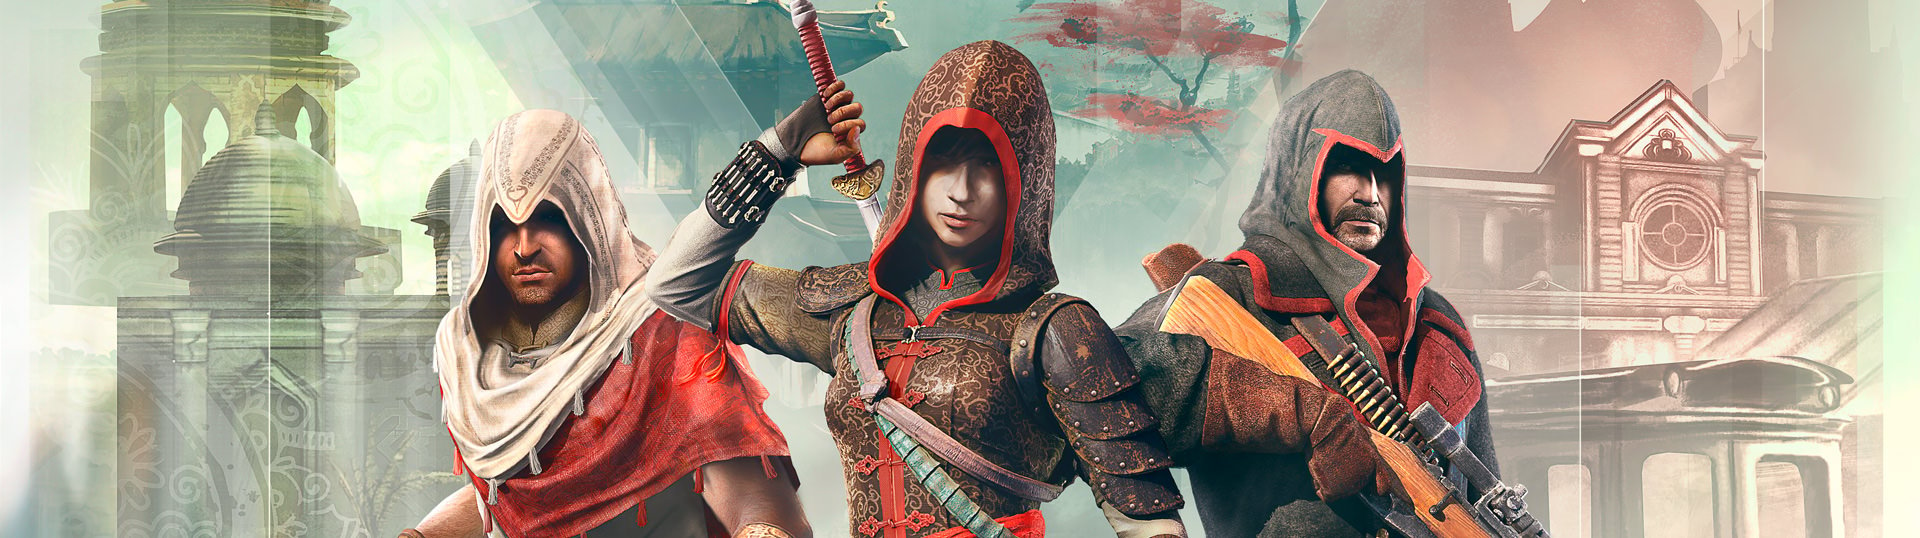 Buy Assassin's Creed Chronicles Trilogy for PC | Ubisoft Store